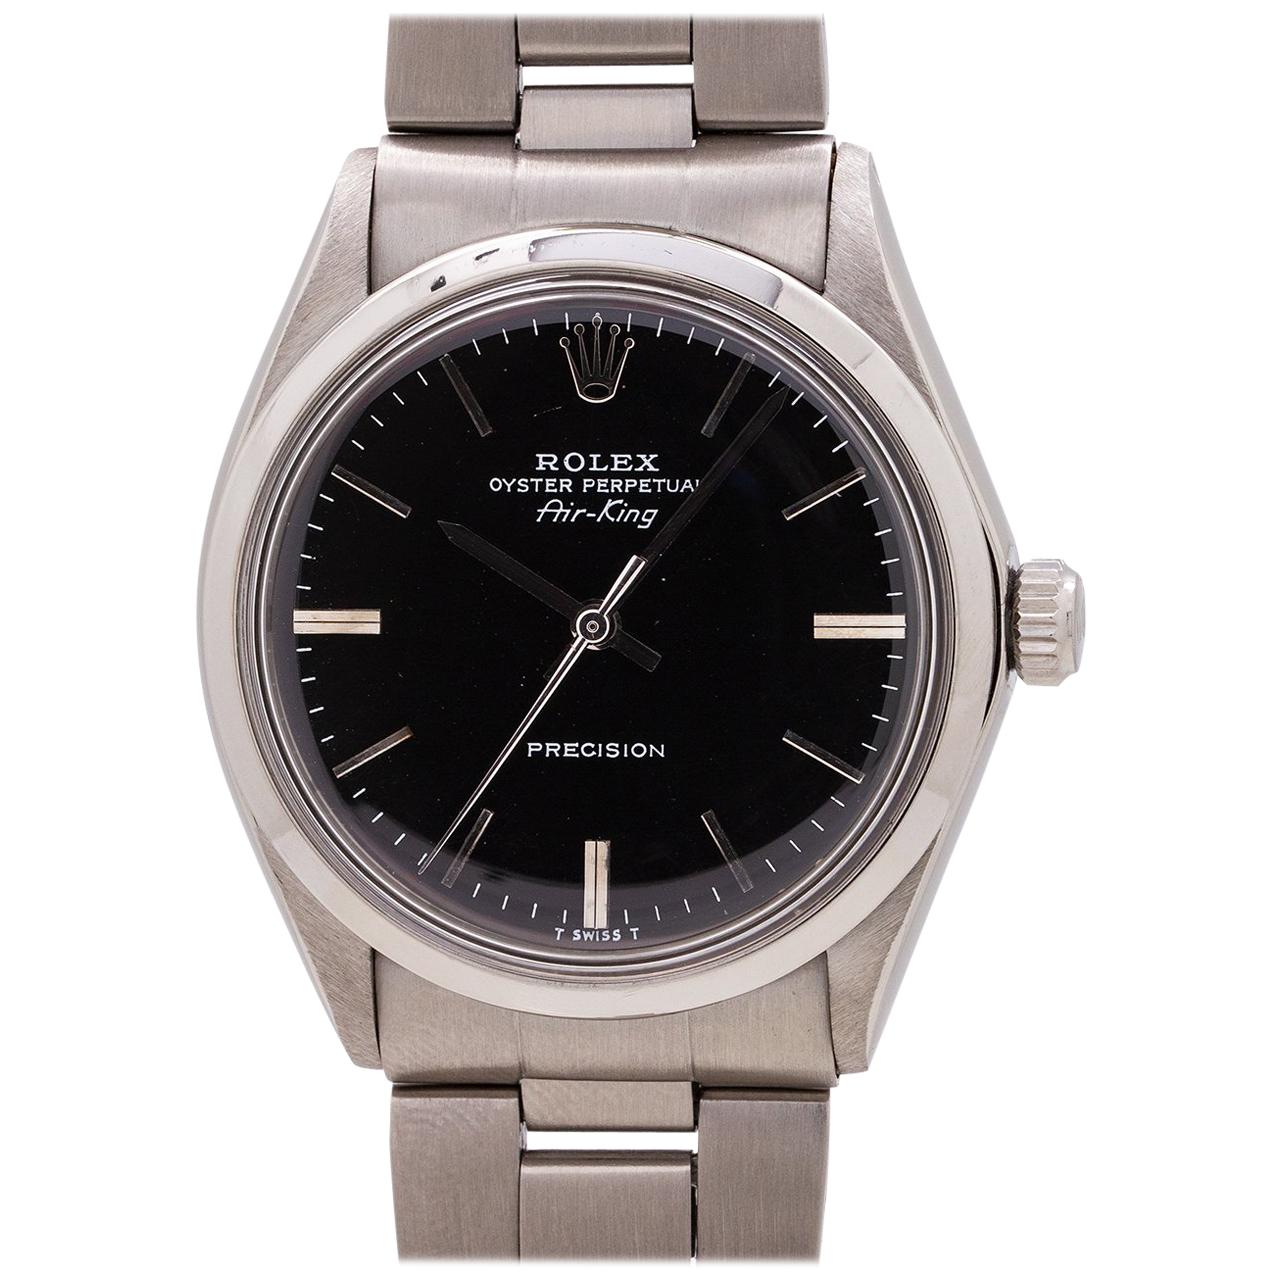 Rolex Stainless Steel Oyster Perpetual Airking Ref 5500, circa 1972